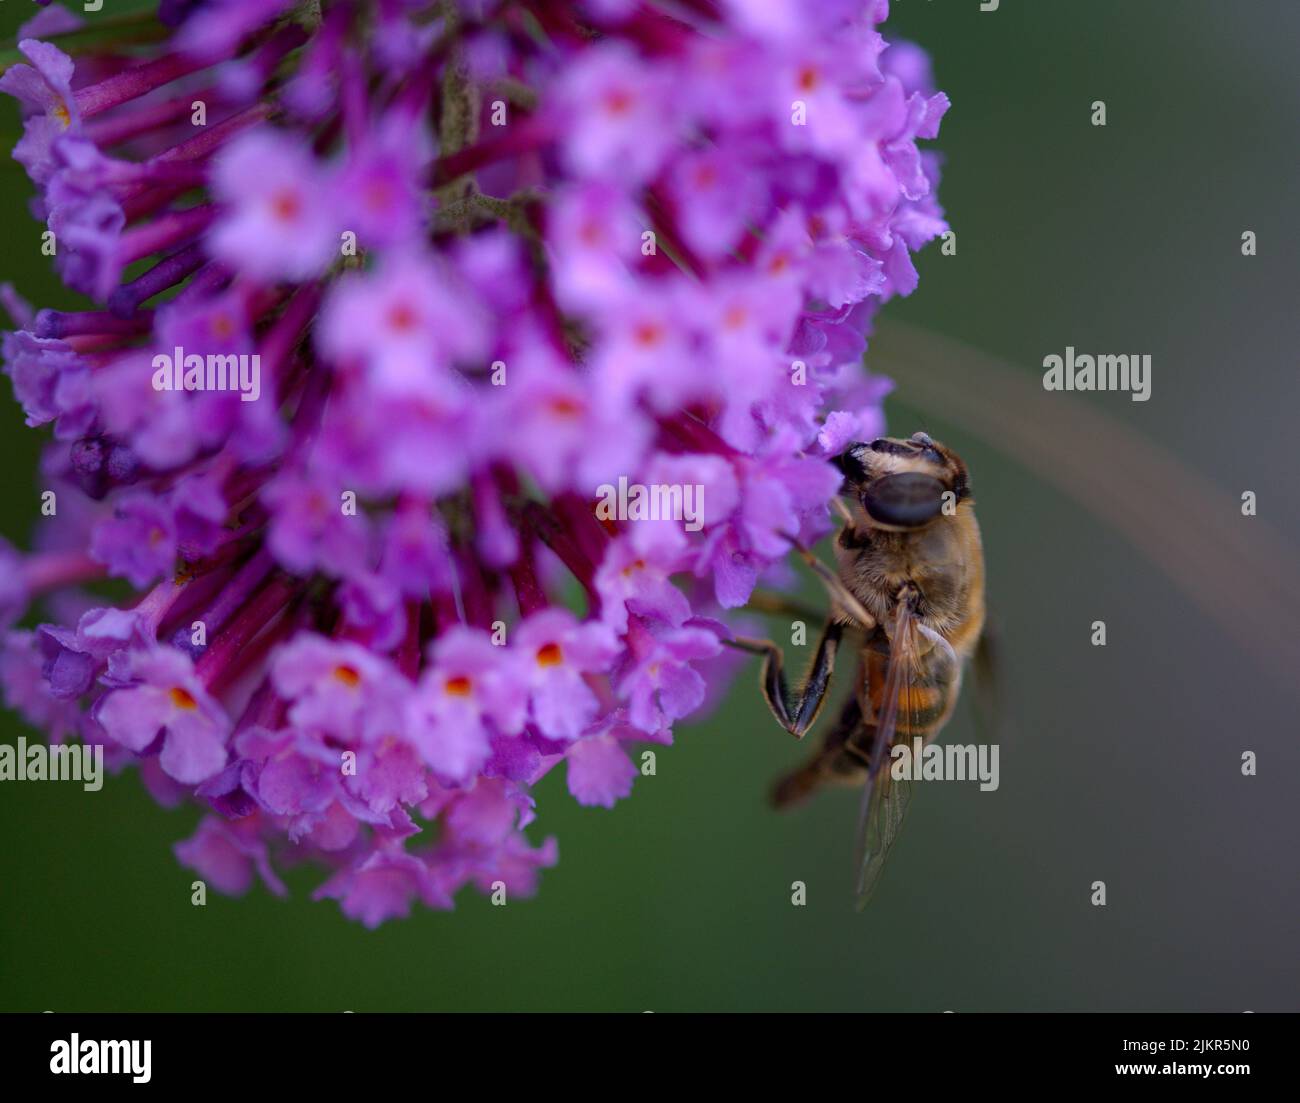 Bee on a purple flower blossom in summer Stock Photo